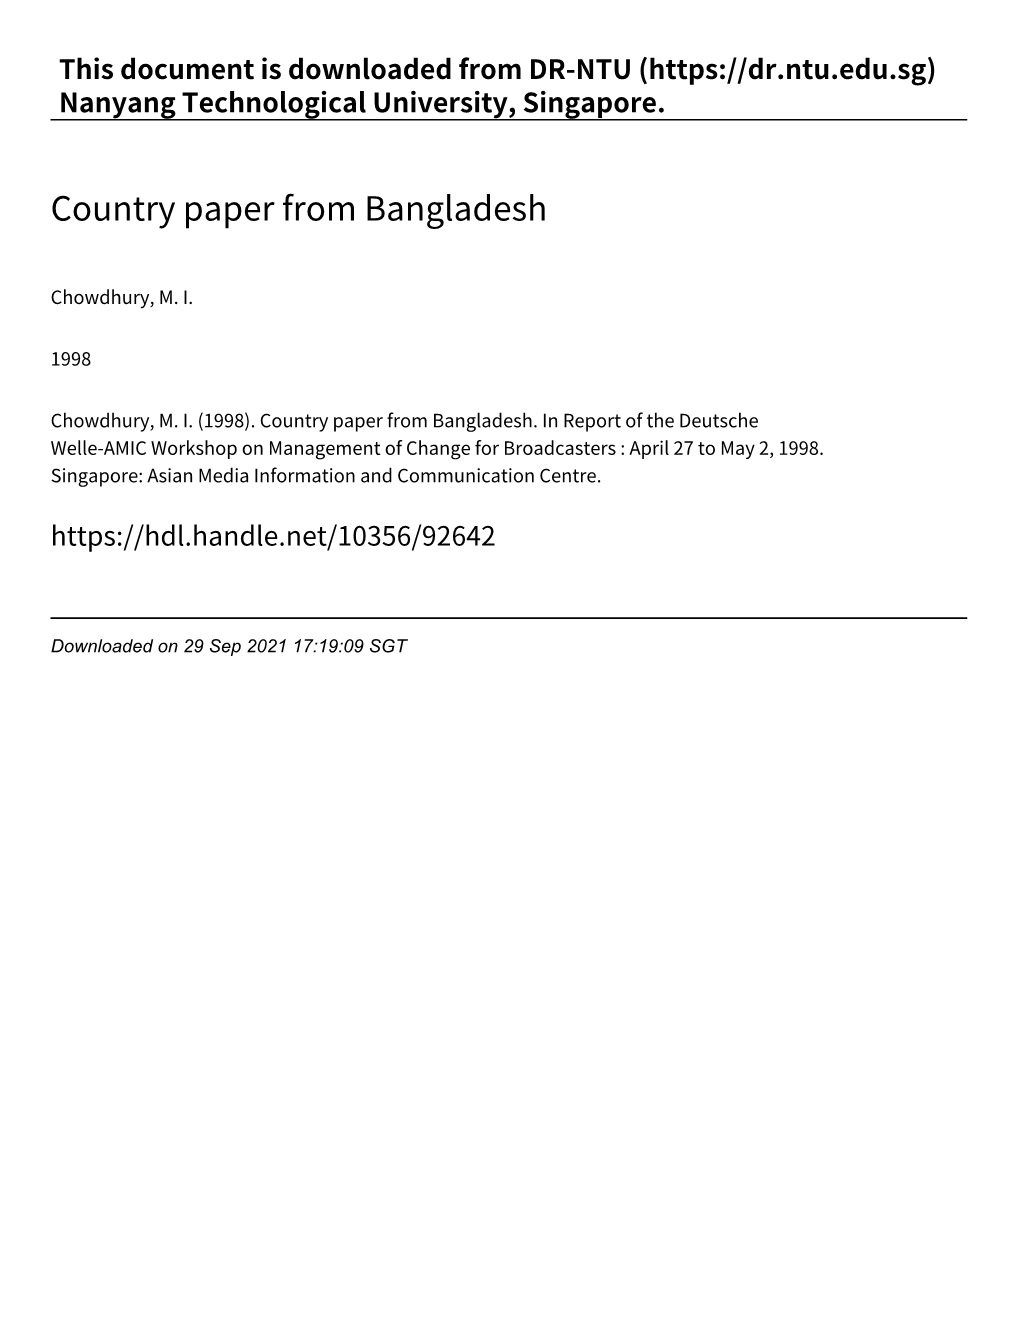 Country Paper from Bangladesh